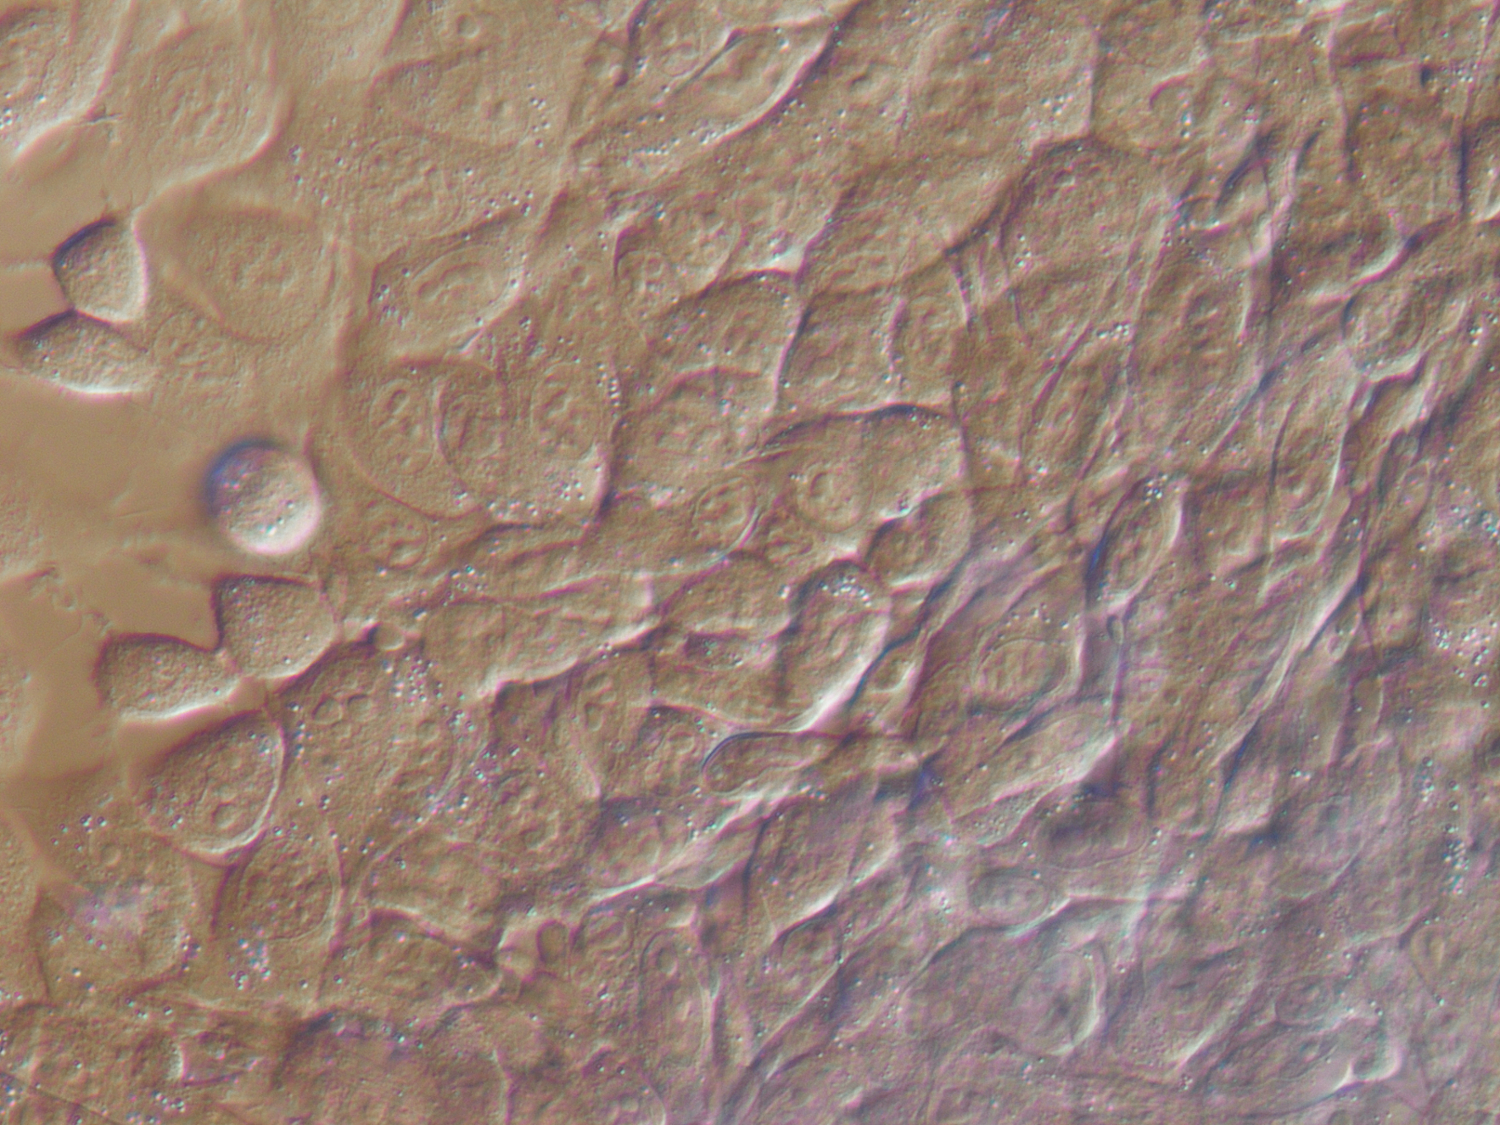 DIC image captured by Paige Bothwell, featuring EMT6 cells, a murine mammary carcinoma cell line, growing as a monolayer.